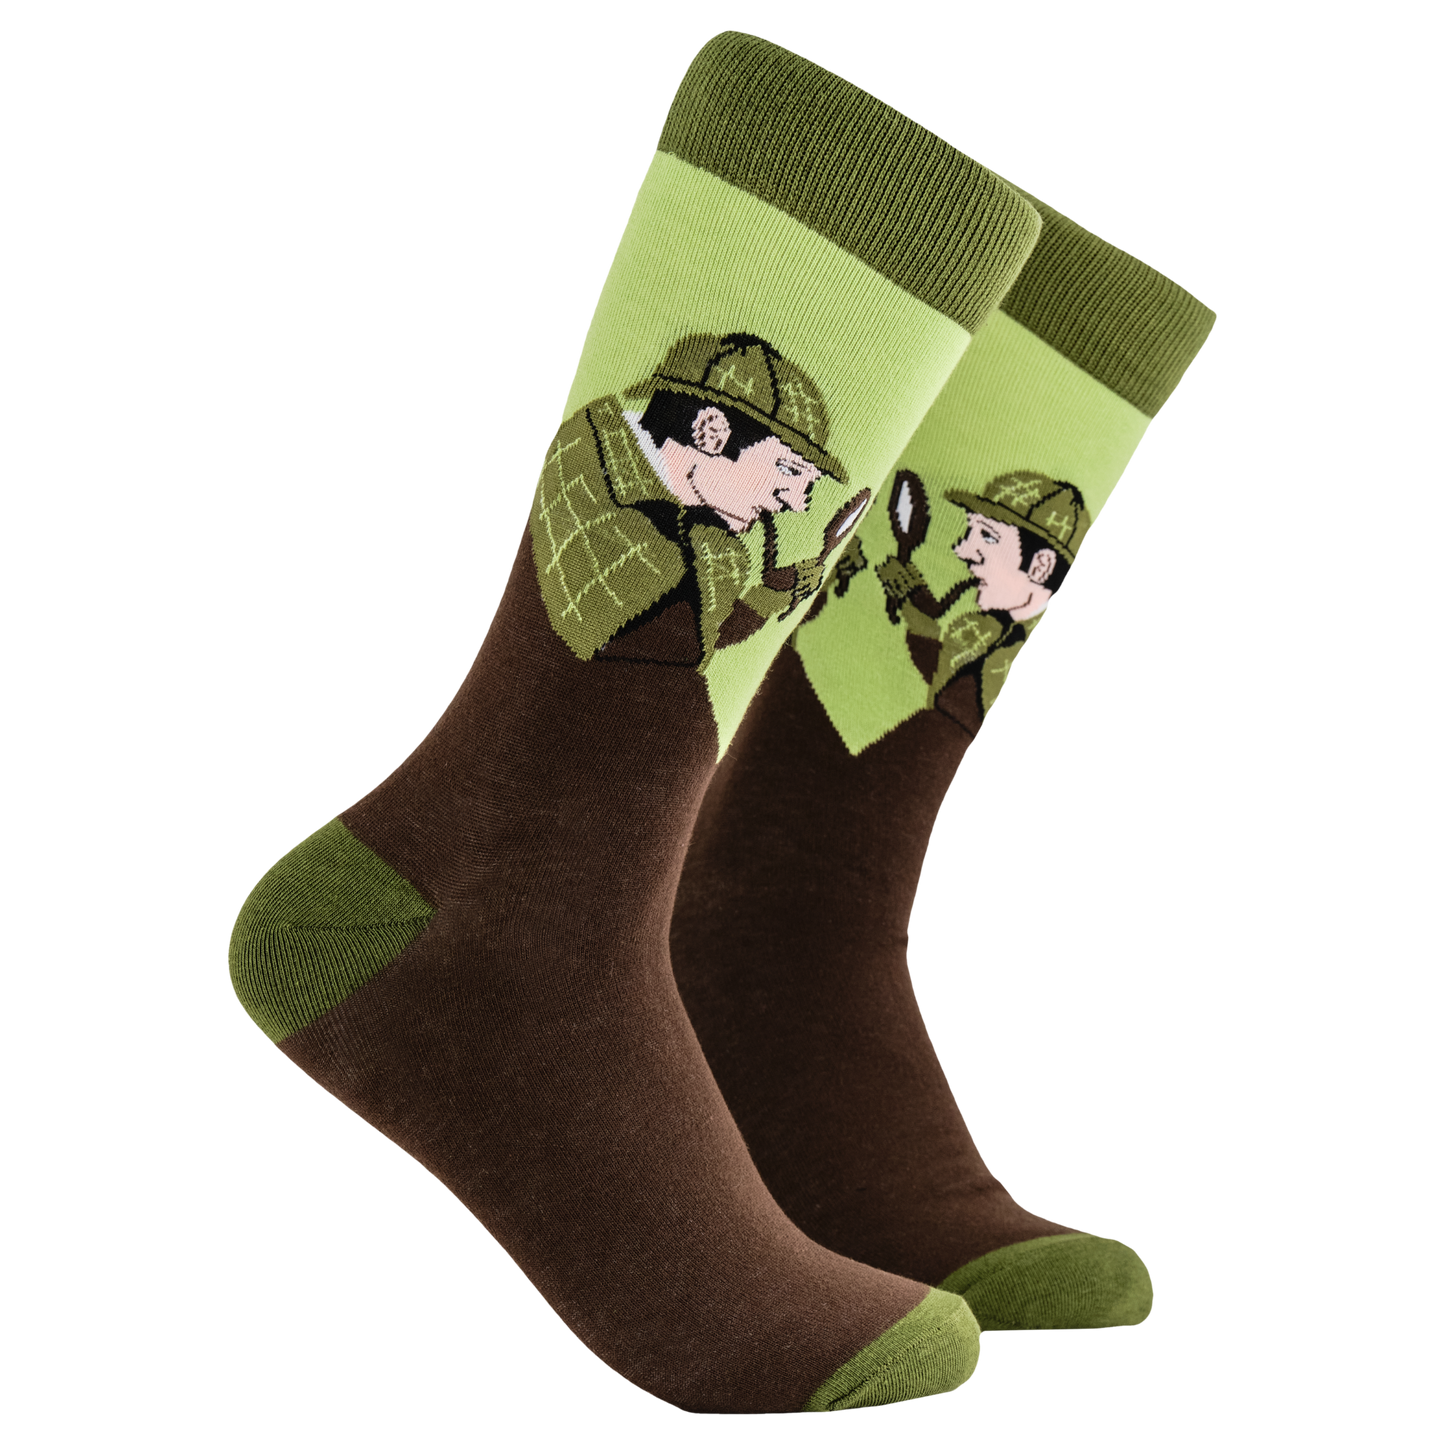 Sherlock Holmes Socks. A pair of socks depicting Sherlock Holmes with hat and pipe. Brown legs, green cuff, heel and toe.